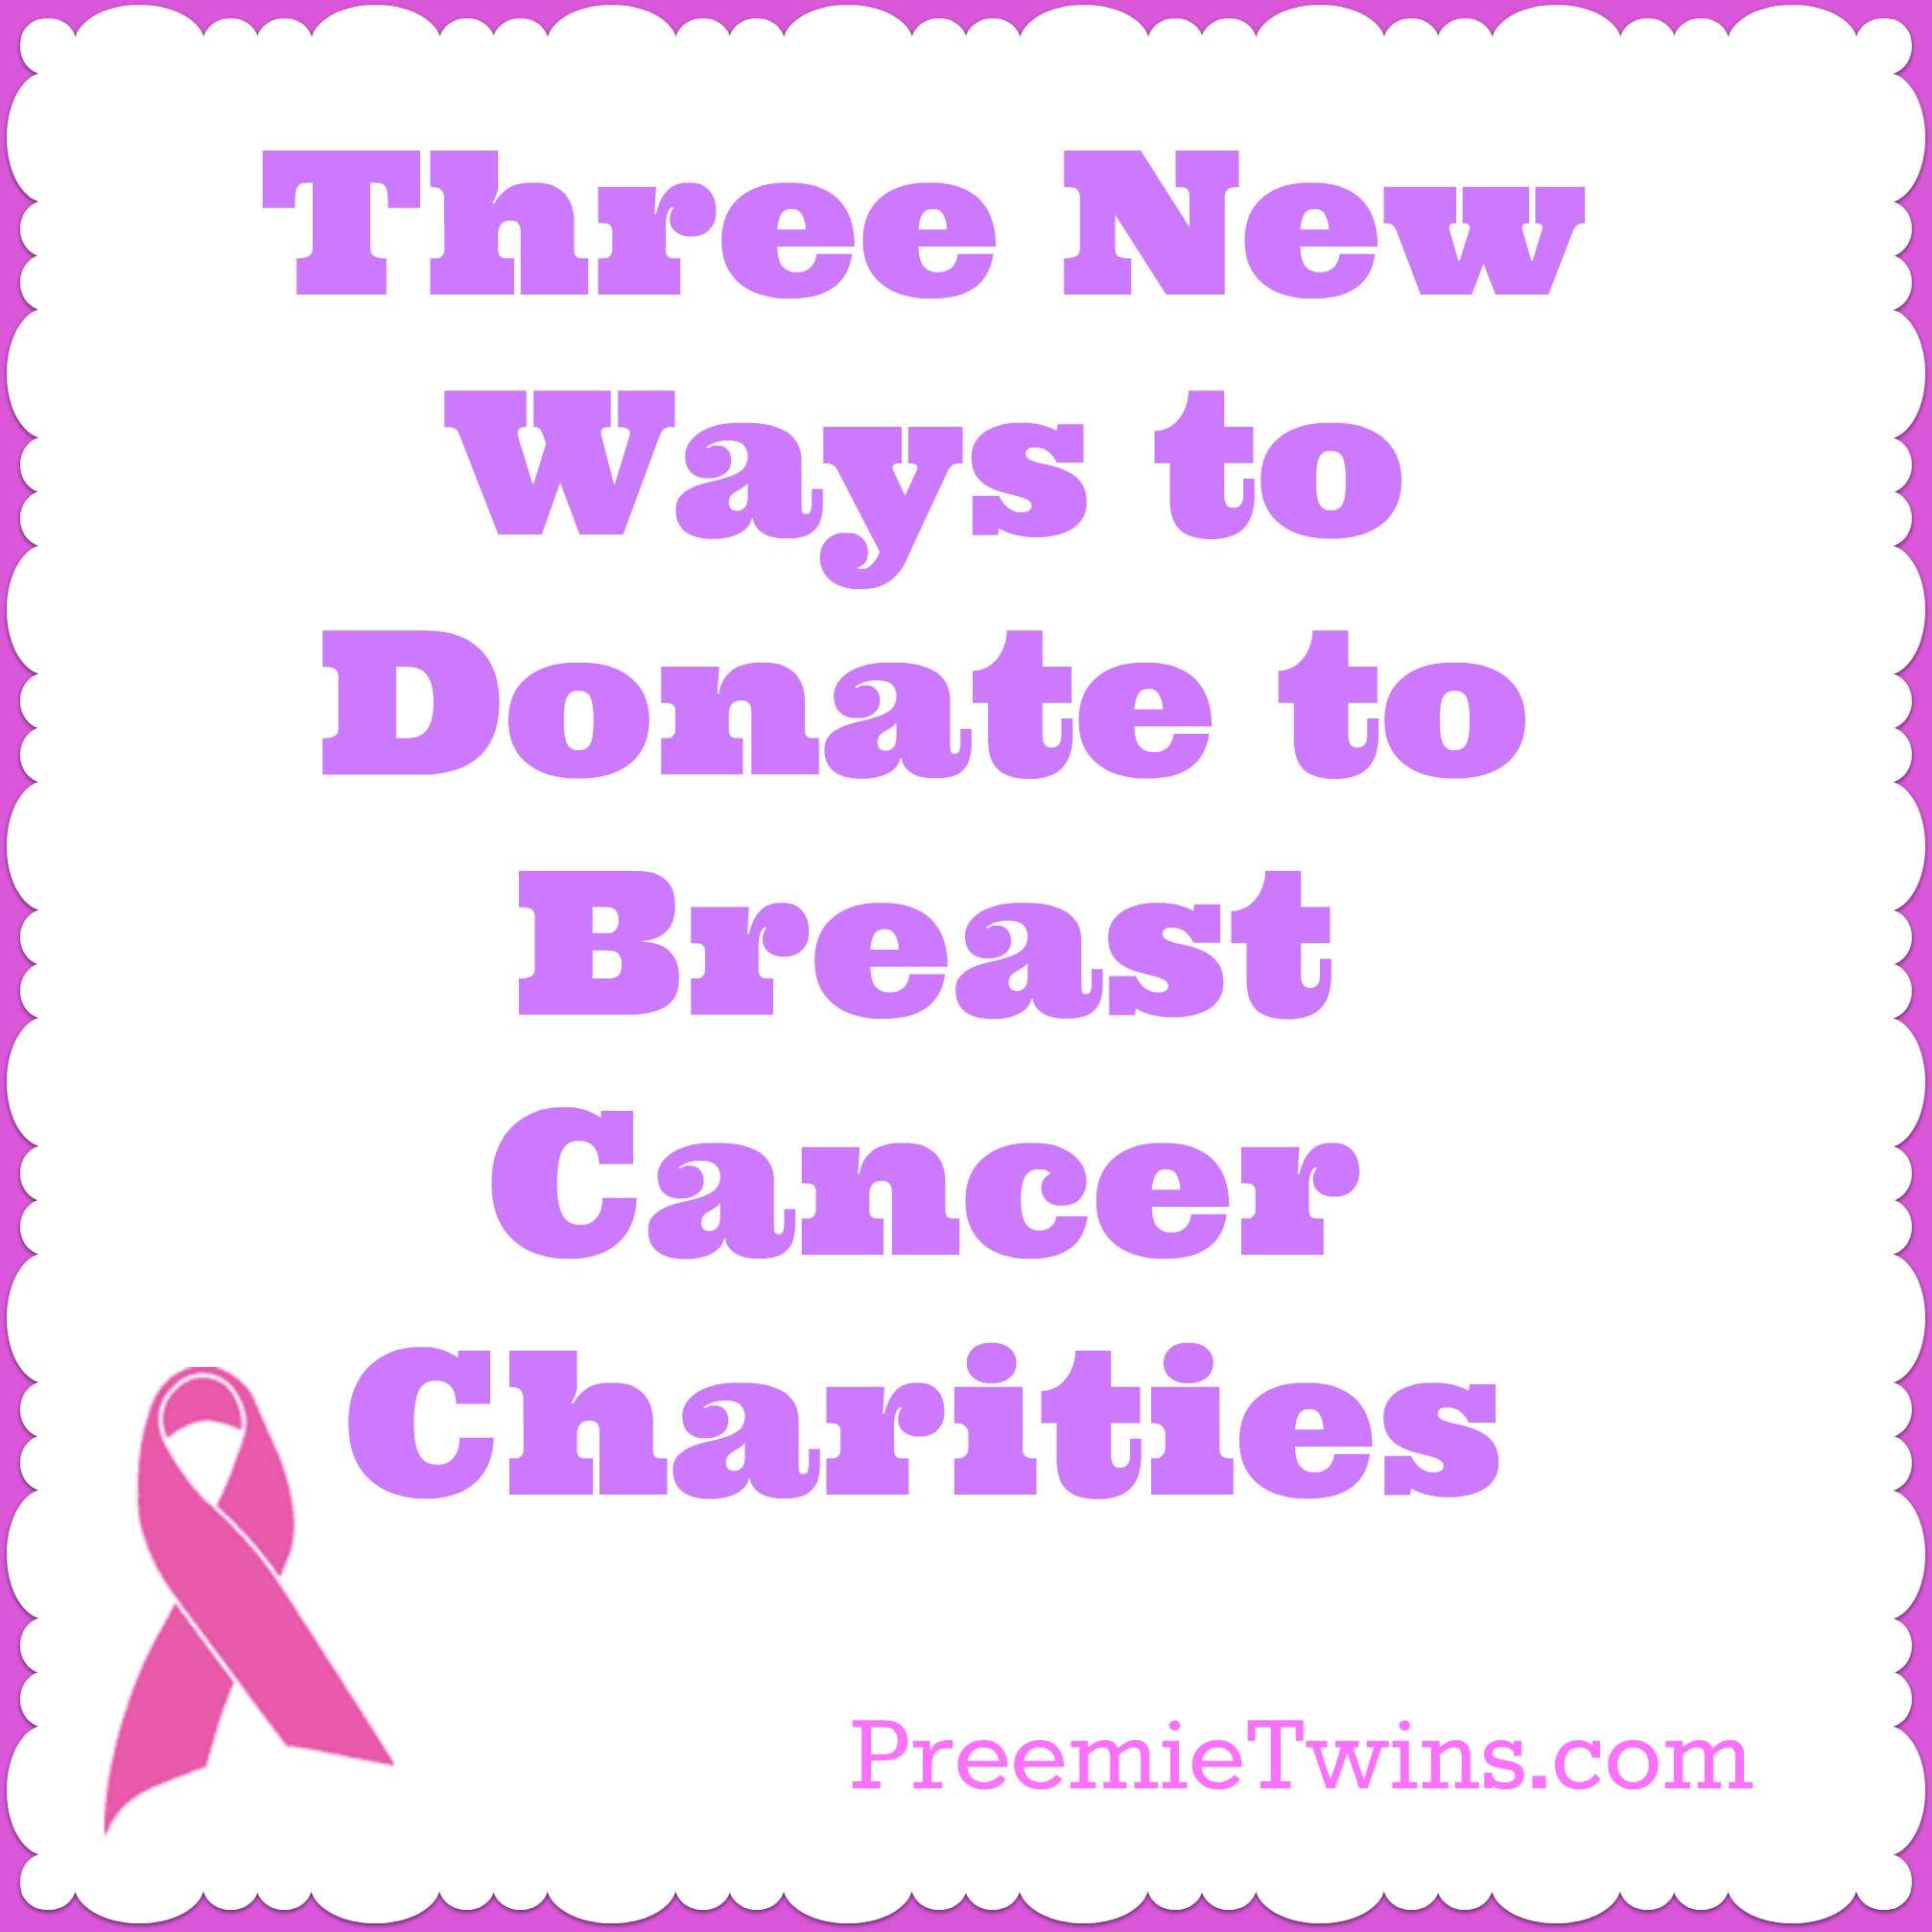 3 Ways to Donate to Breast Cancer Charities